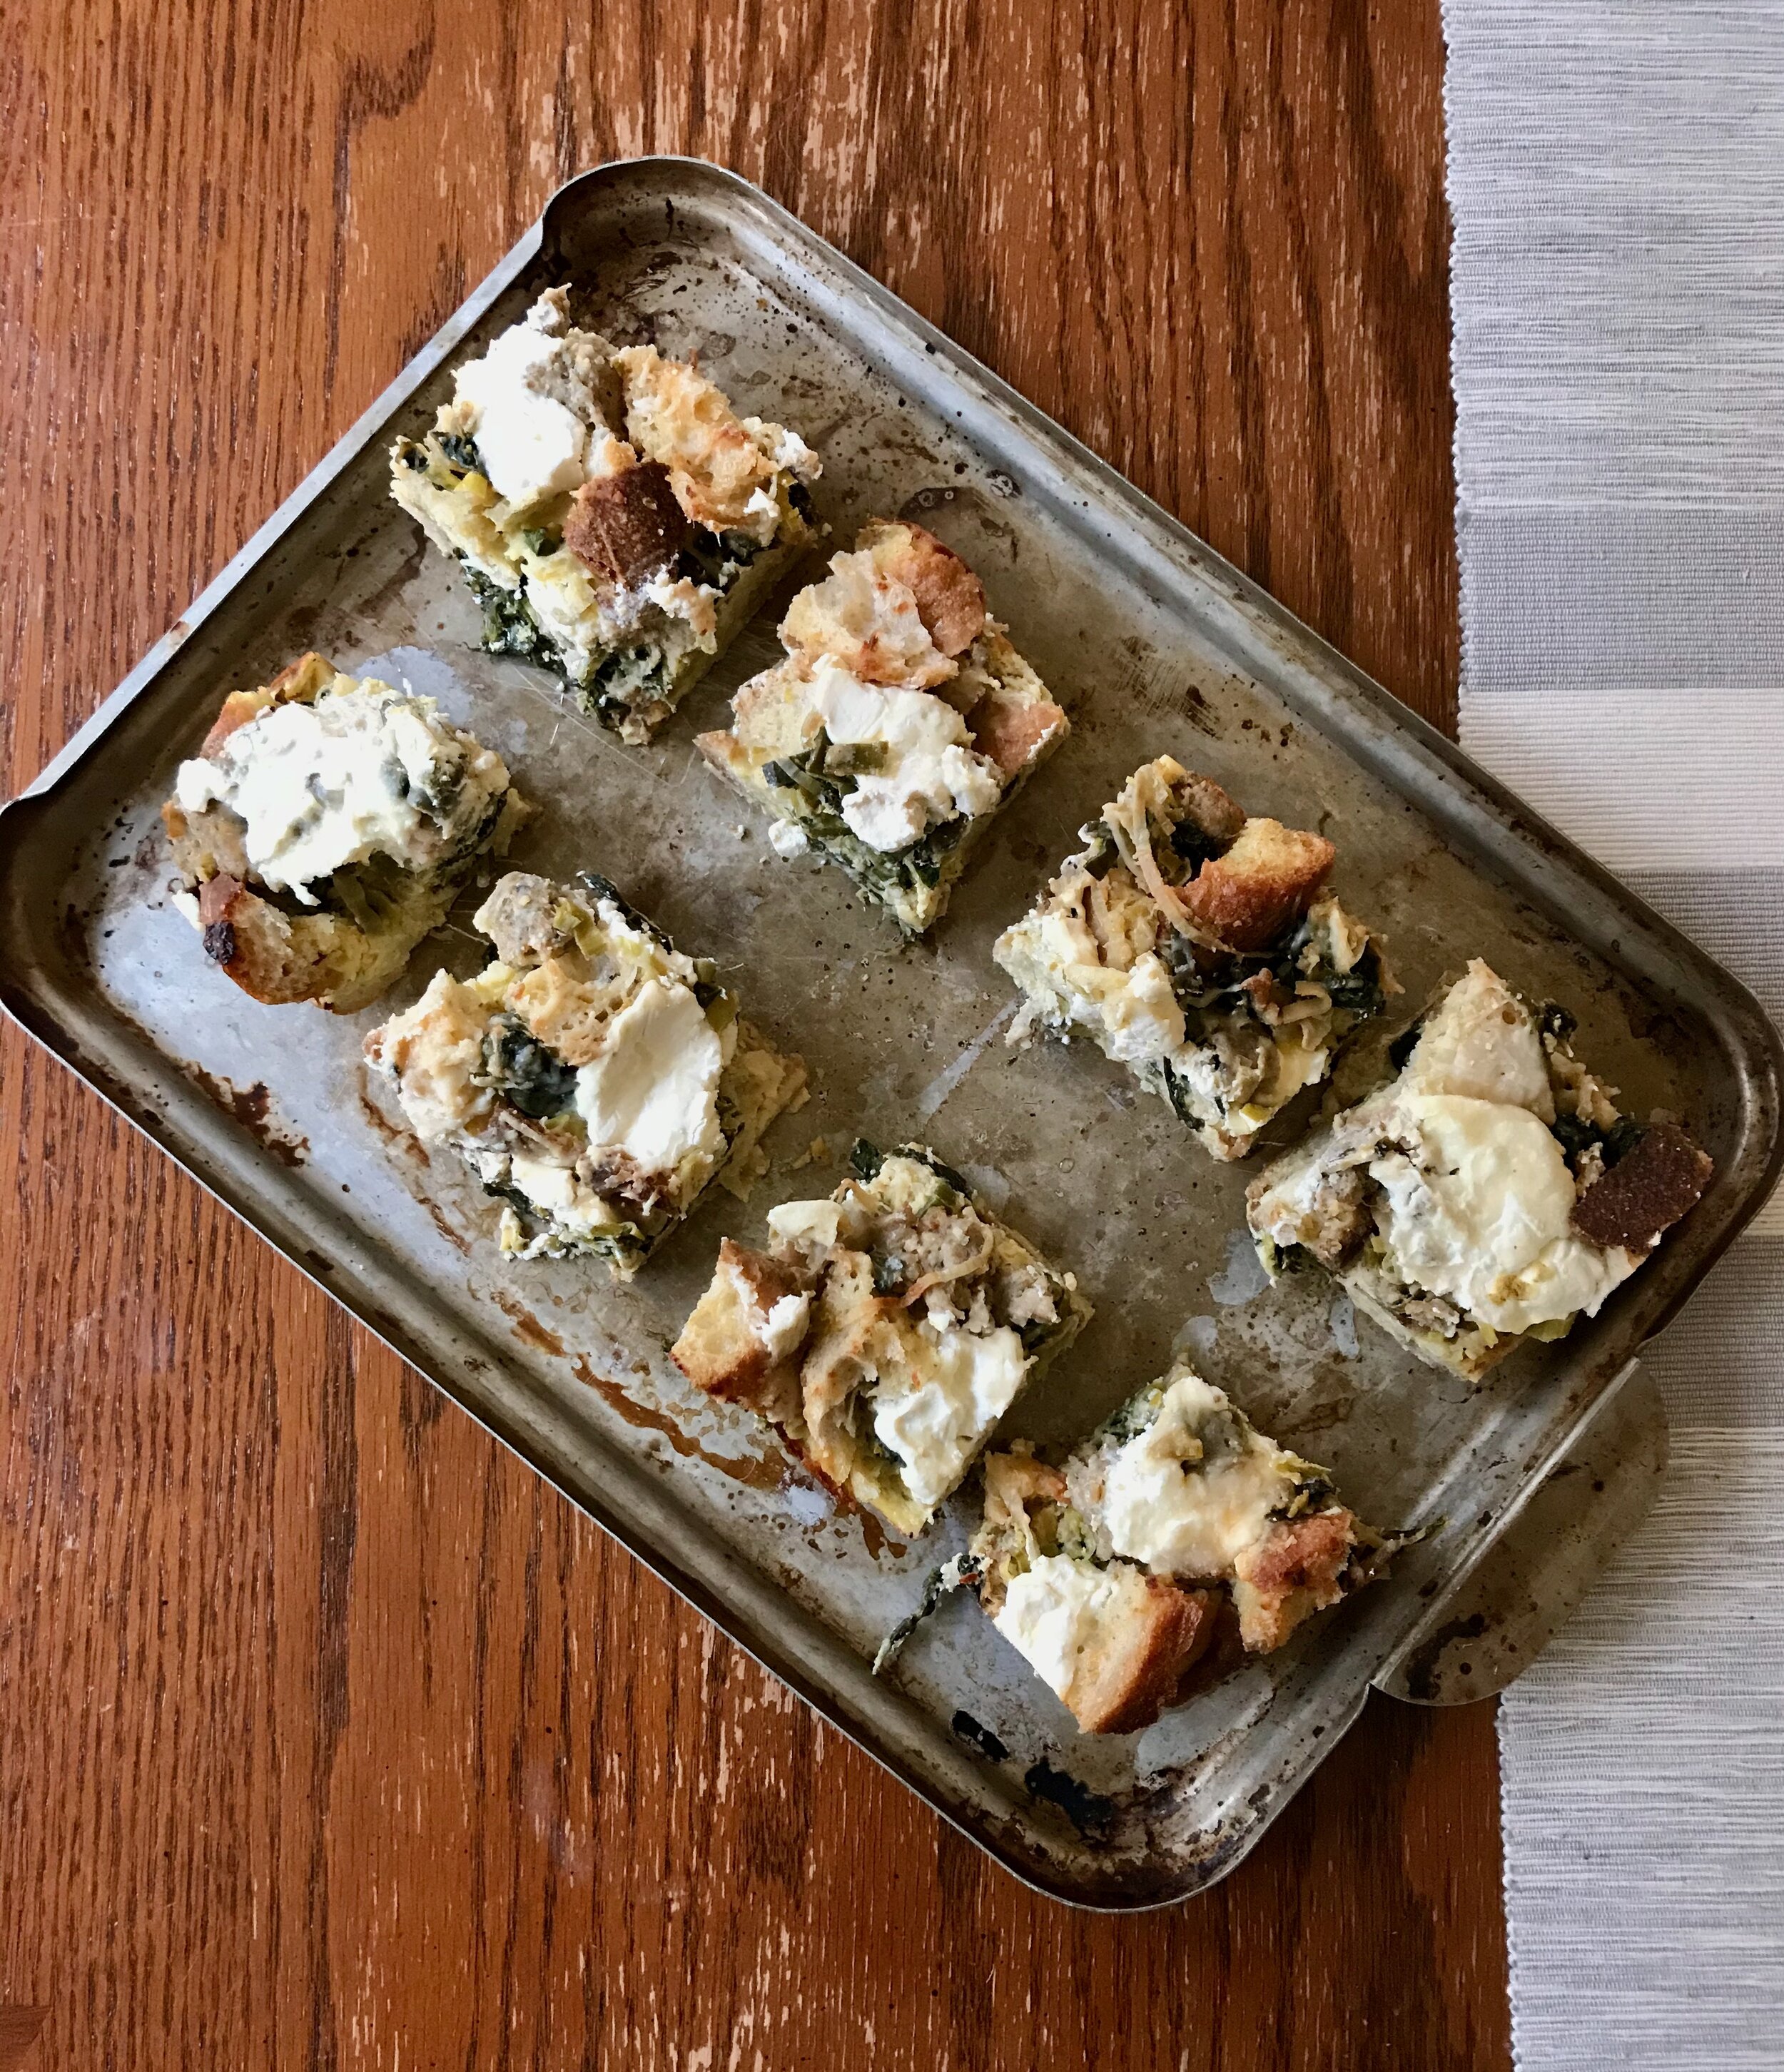 Kale And Leek Strata With Ricotta Delectably Mine